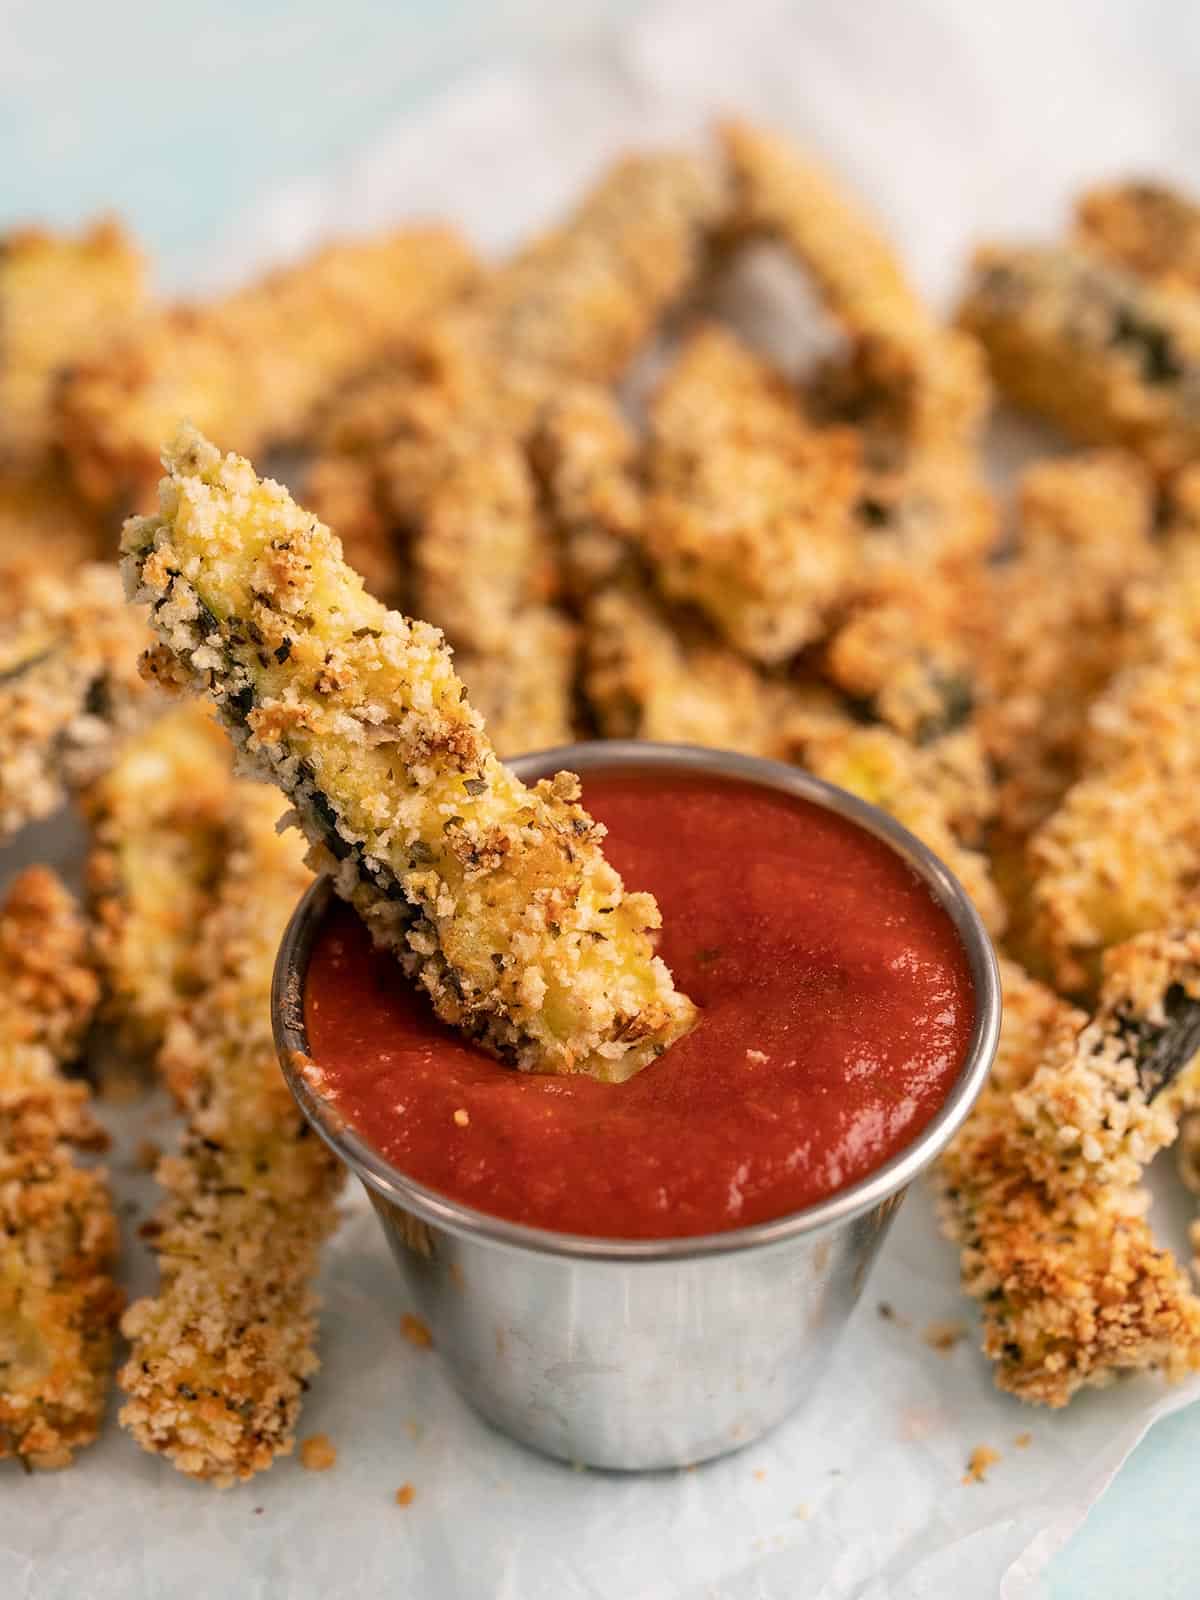 Close up of a baked zucchini fry being dipped into a cup of pizza sauce.